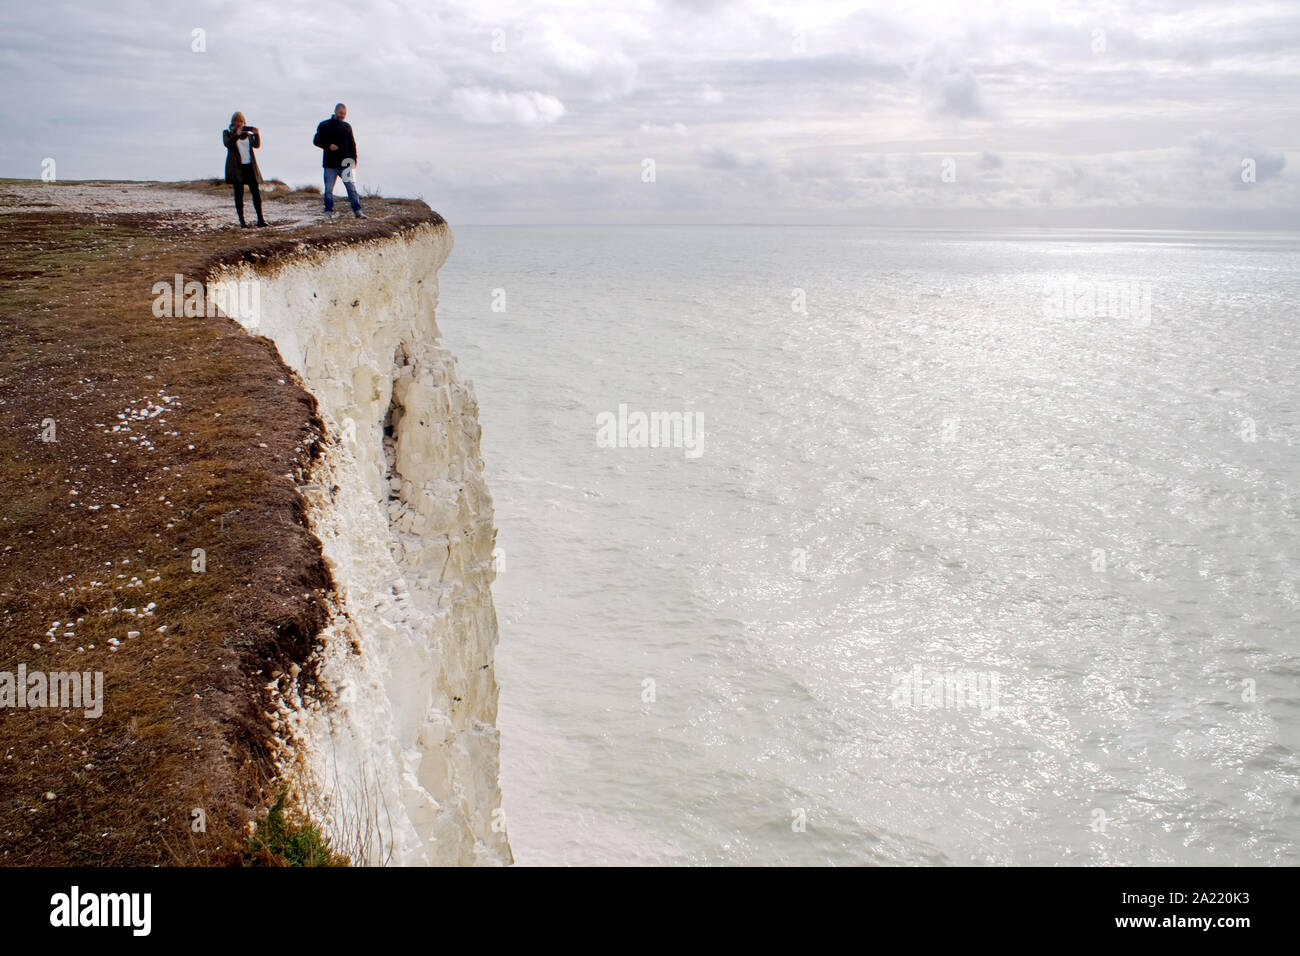 Birling Gap, East Sussex, UK. 30th Sep, 2019. Recent cliff falls along the coast near the iconic Seven Sisters chalk cliffs have turned the sea white. Steps to the beach have been closed due to the danger of further falls but despitre the risk, tourists are still getting too close to the edge of the 400 foot drop to get selfies. One man was seen jumping close to the edge. A newlywed couple was also seen having photos taken at the edge of the crumbling cliffs. Credit: Peter Cripps/Alamy Live News Stock Photo